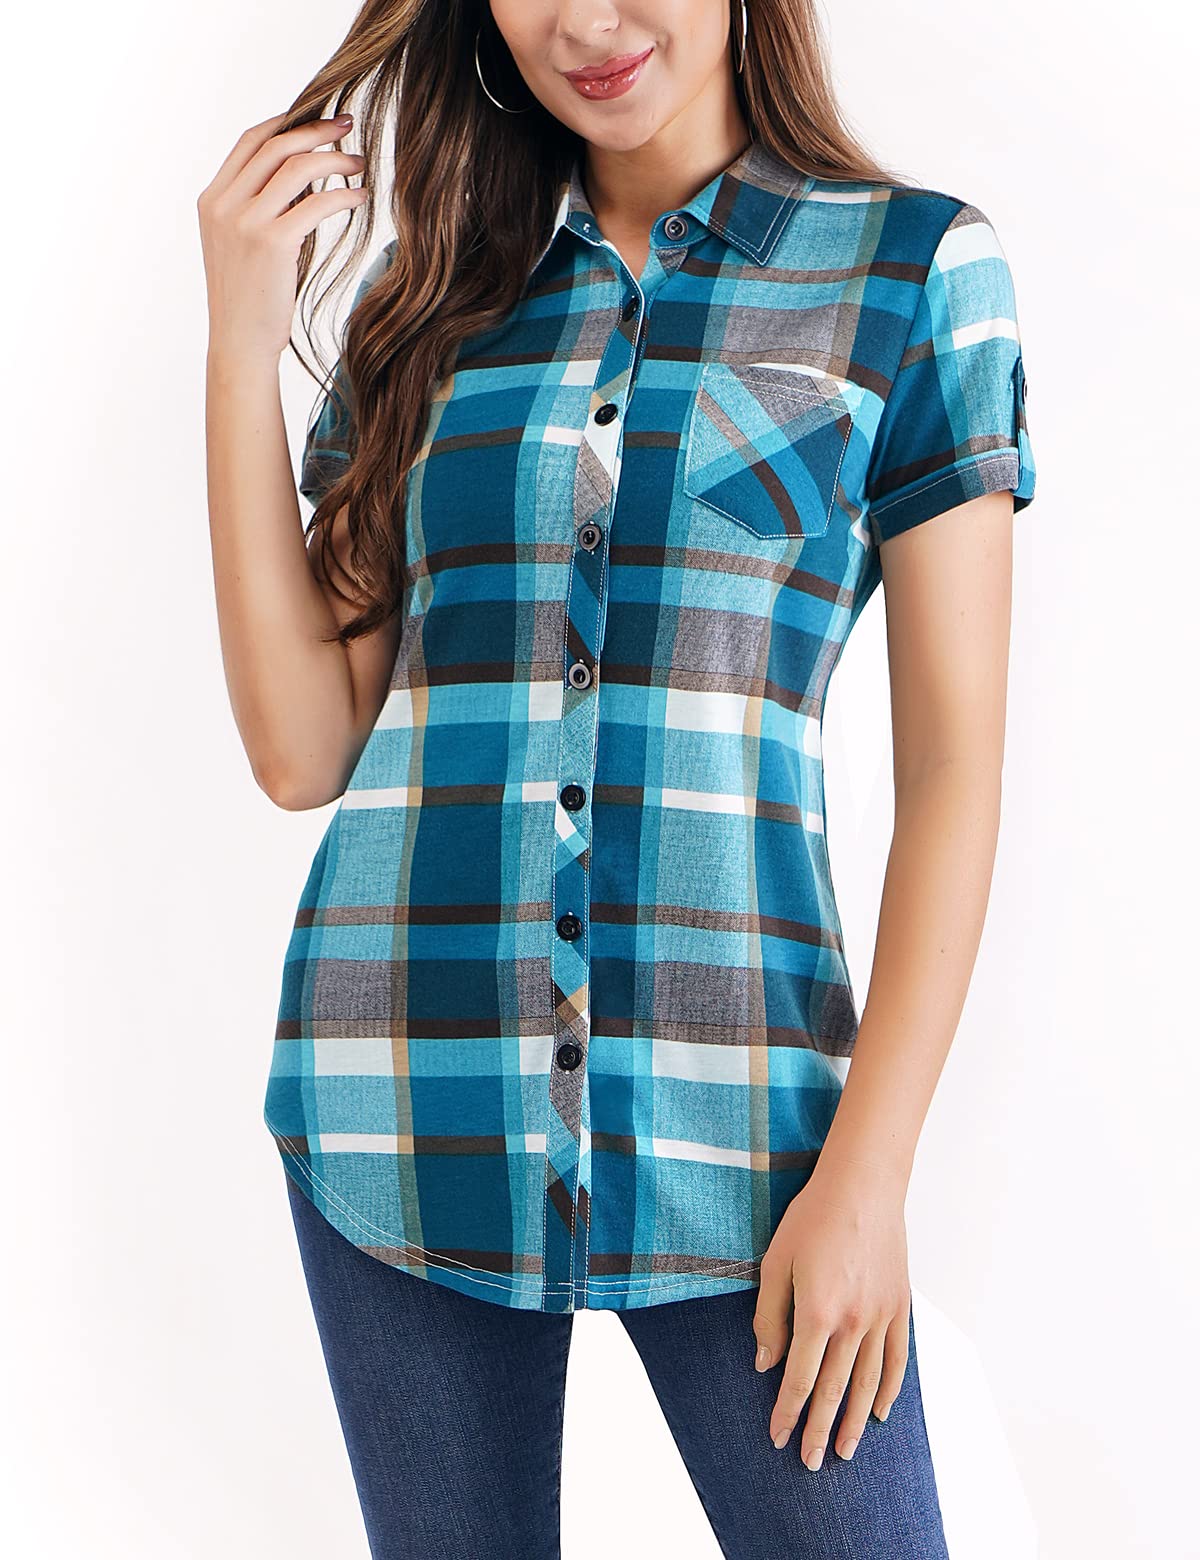 DJT Roll Up Long Sleeve Short Sleeve Turquoise Women’s Collared Button Down Plaid Shirt